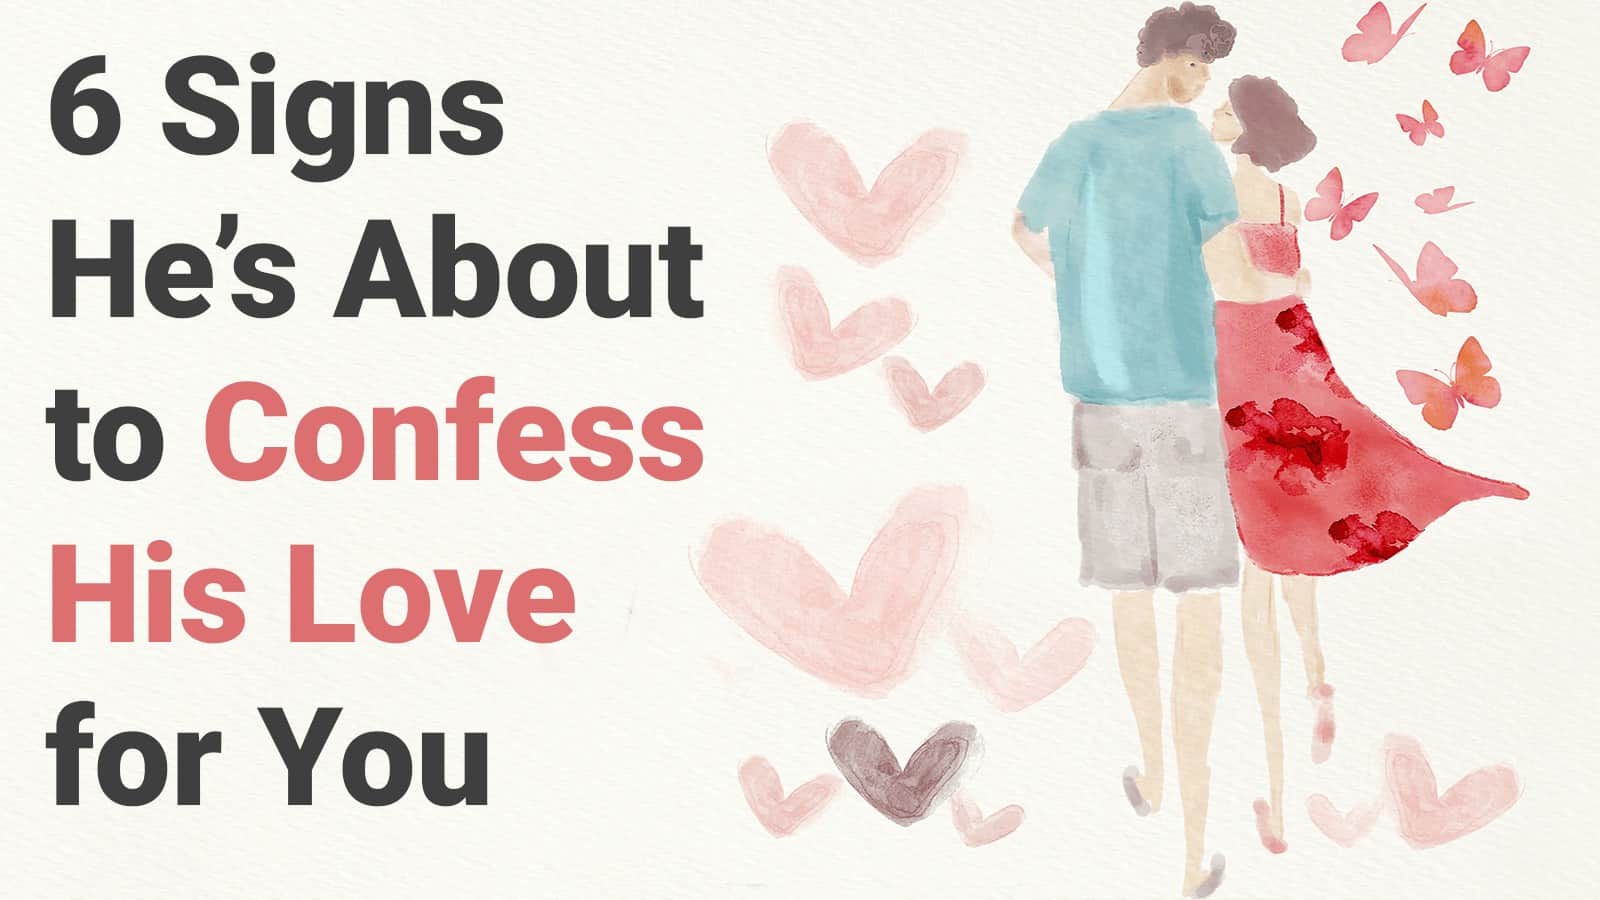 6 Signs He’s About to Confess His Love for You